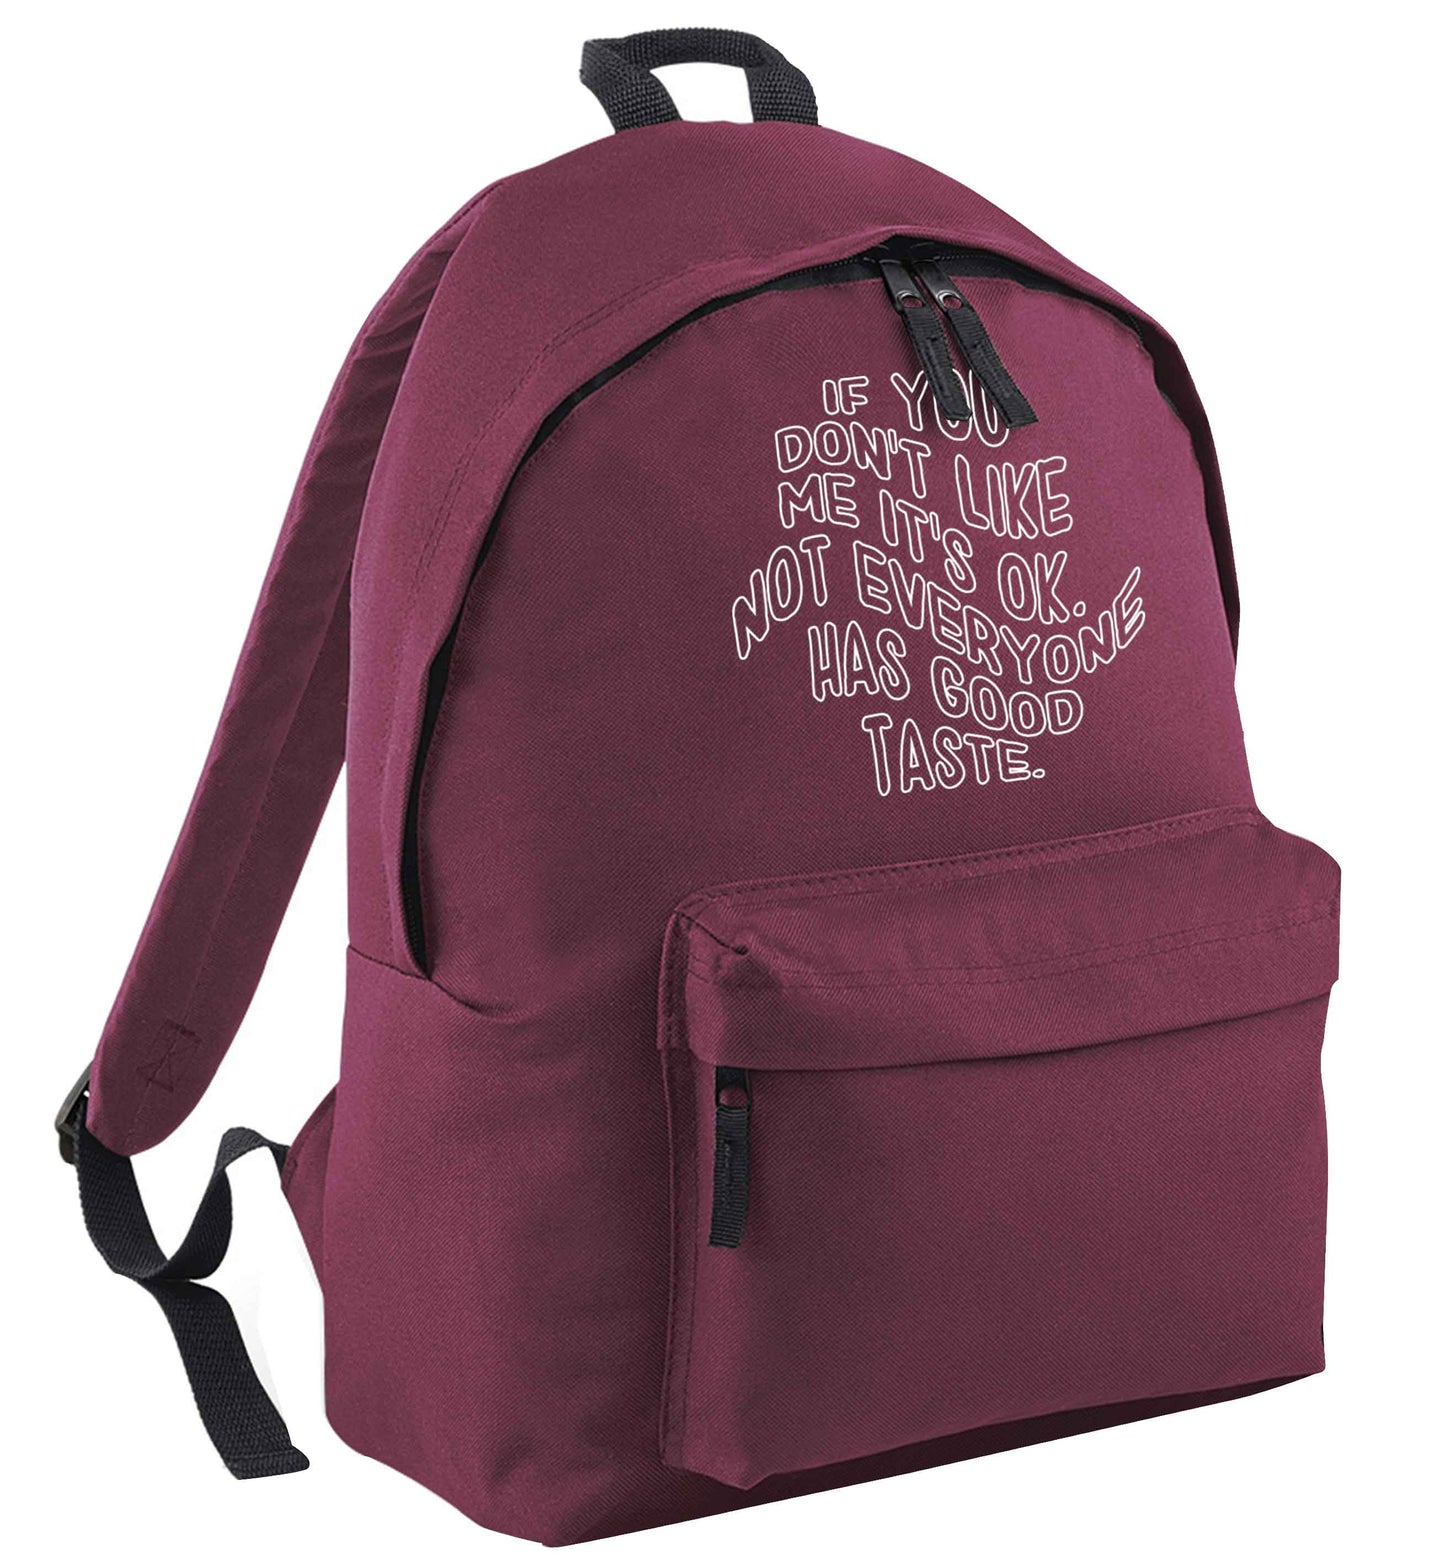 If you don't like me it's ok not everyone has good taste maroon adults backpack